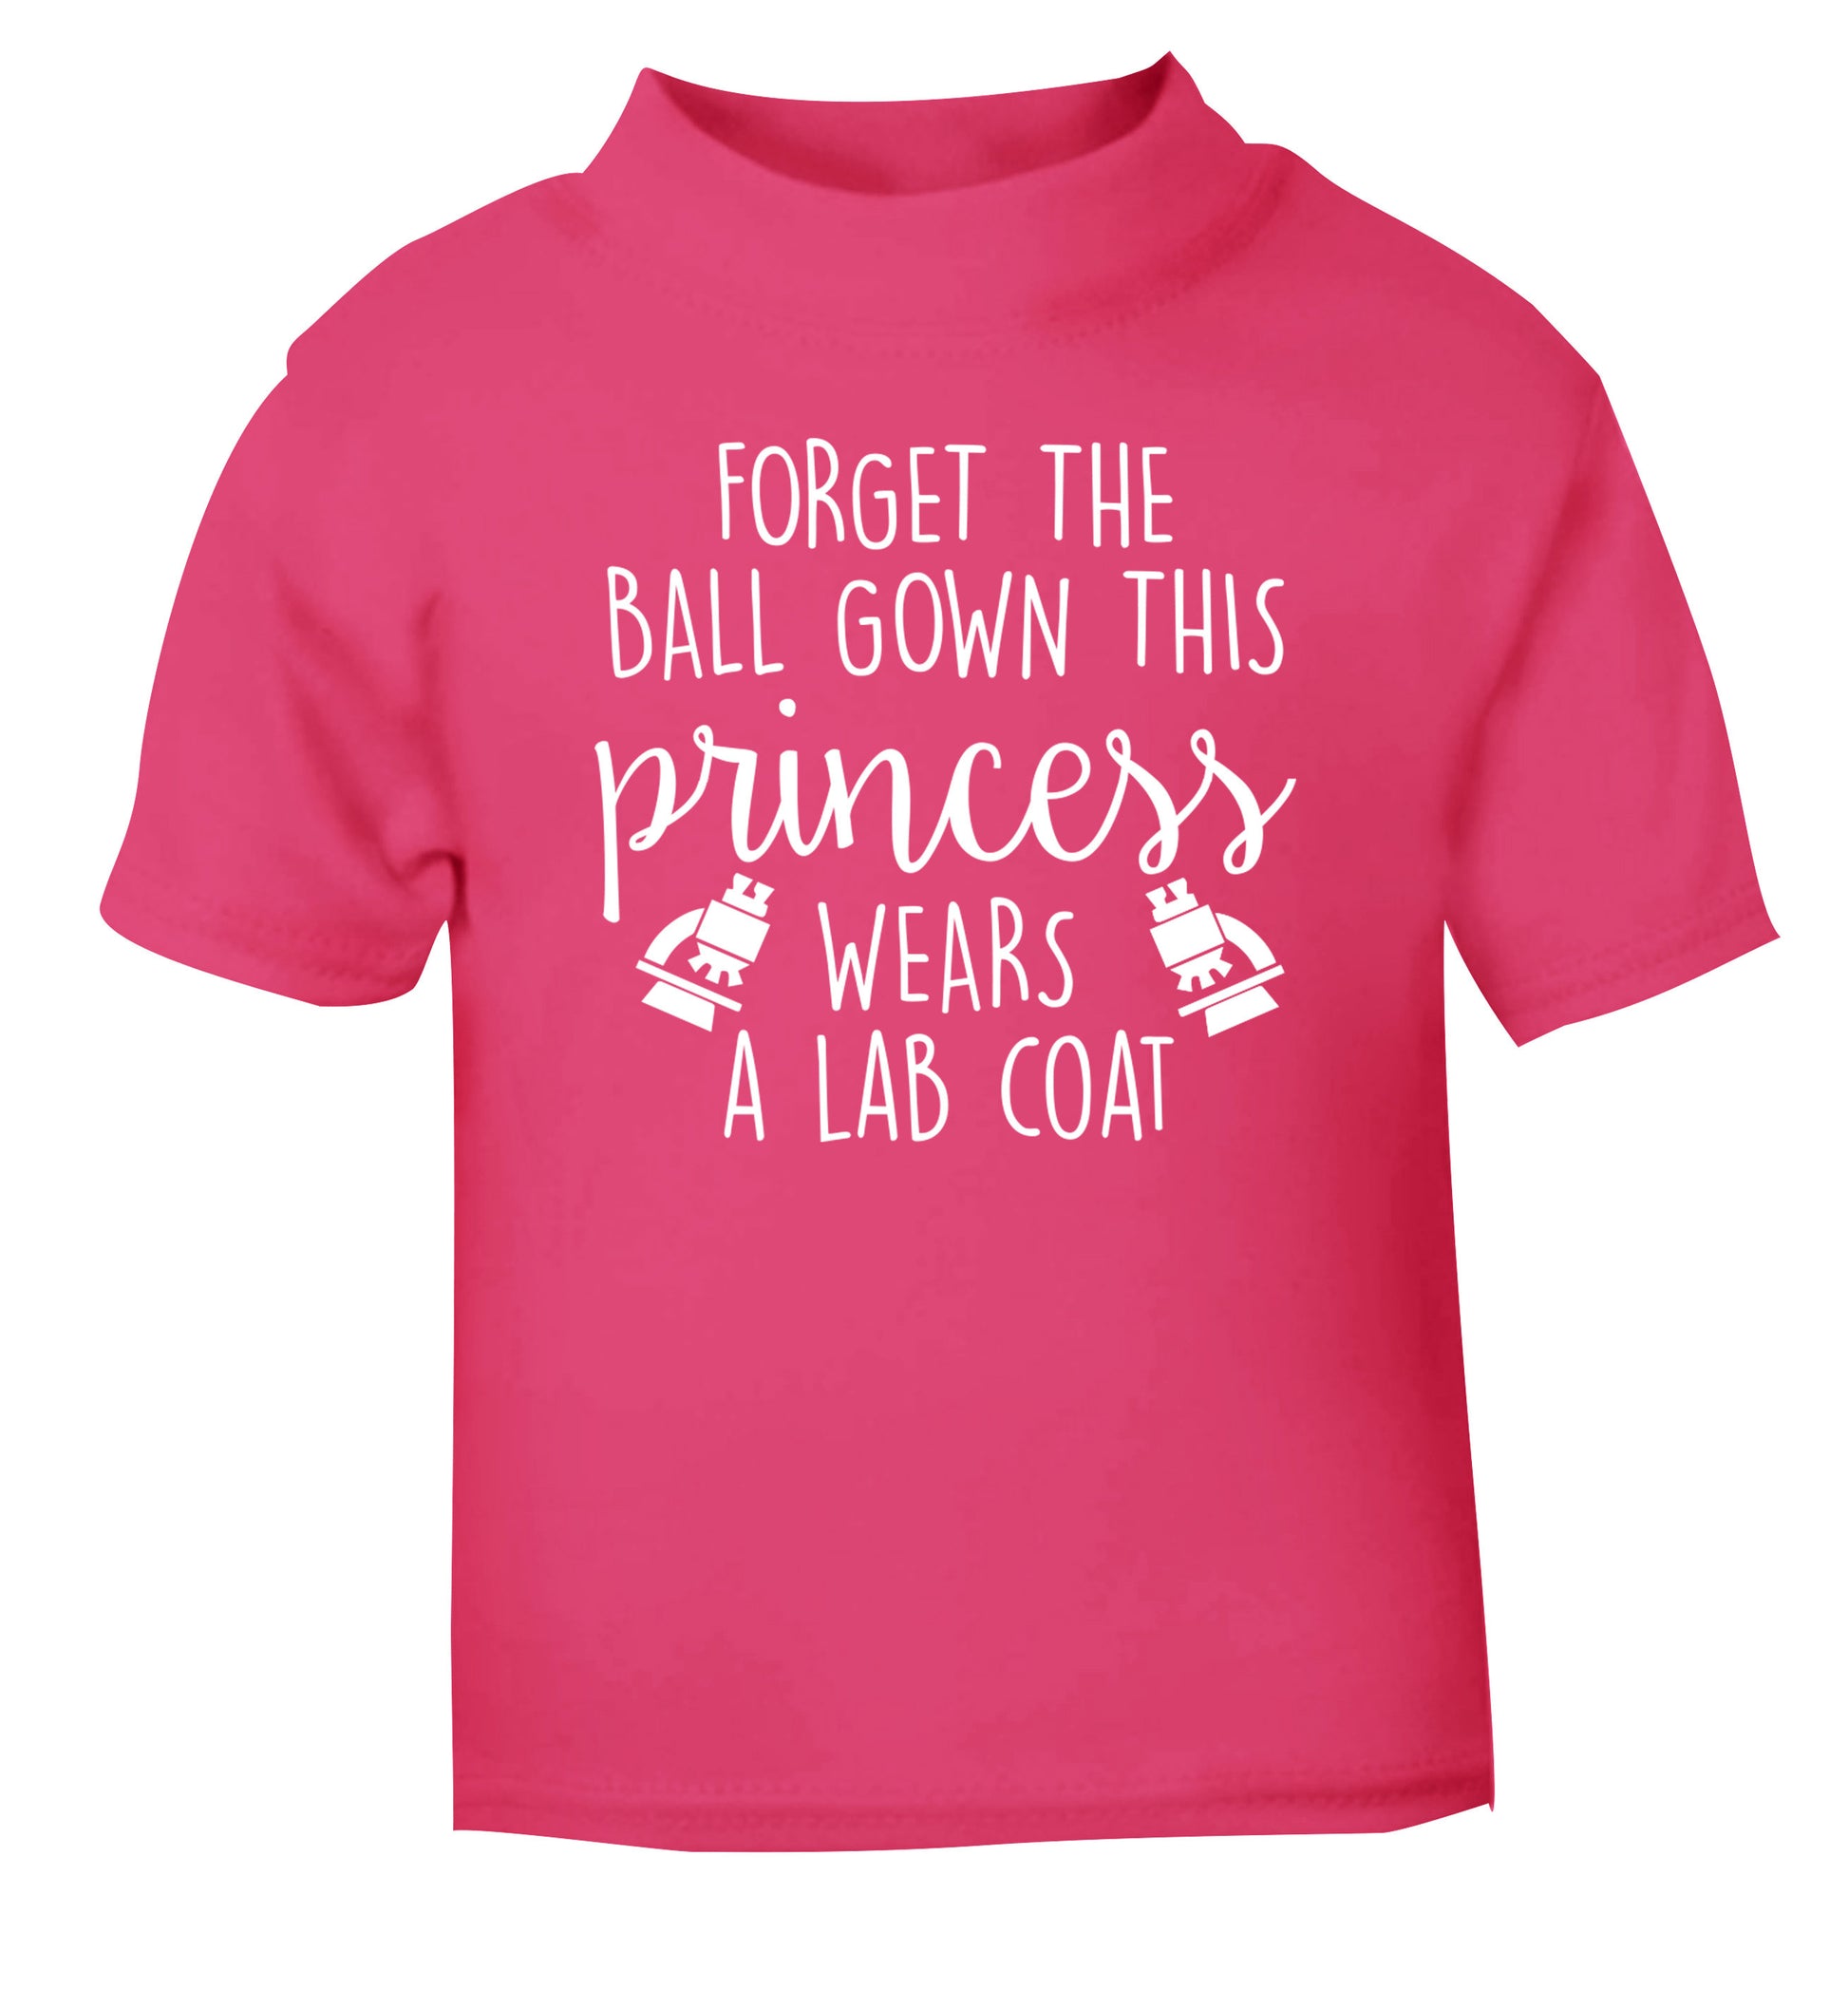 Forget the ball gown this princess wears a lab coat pink Baby Toddler Tshirt 2 Years